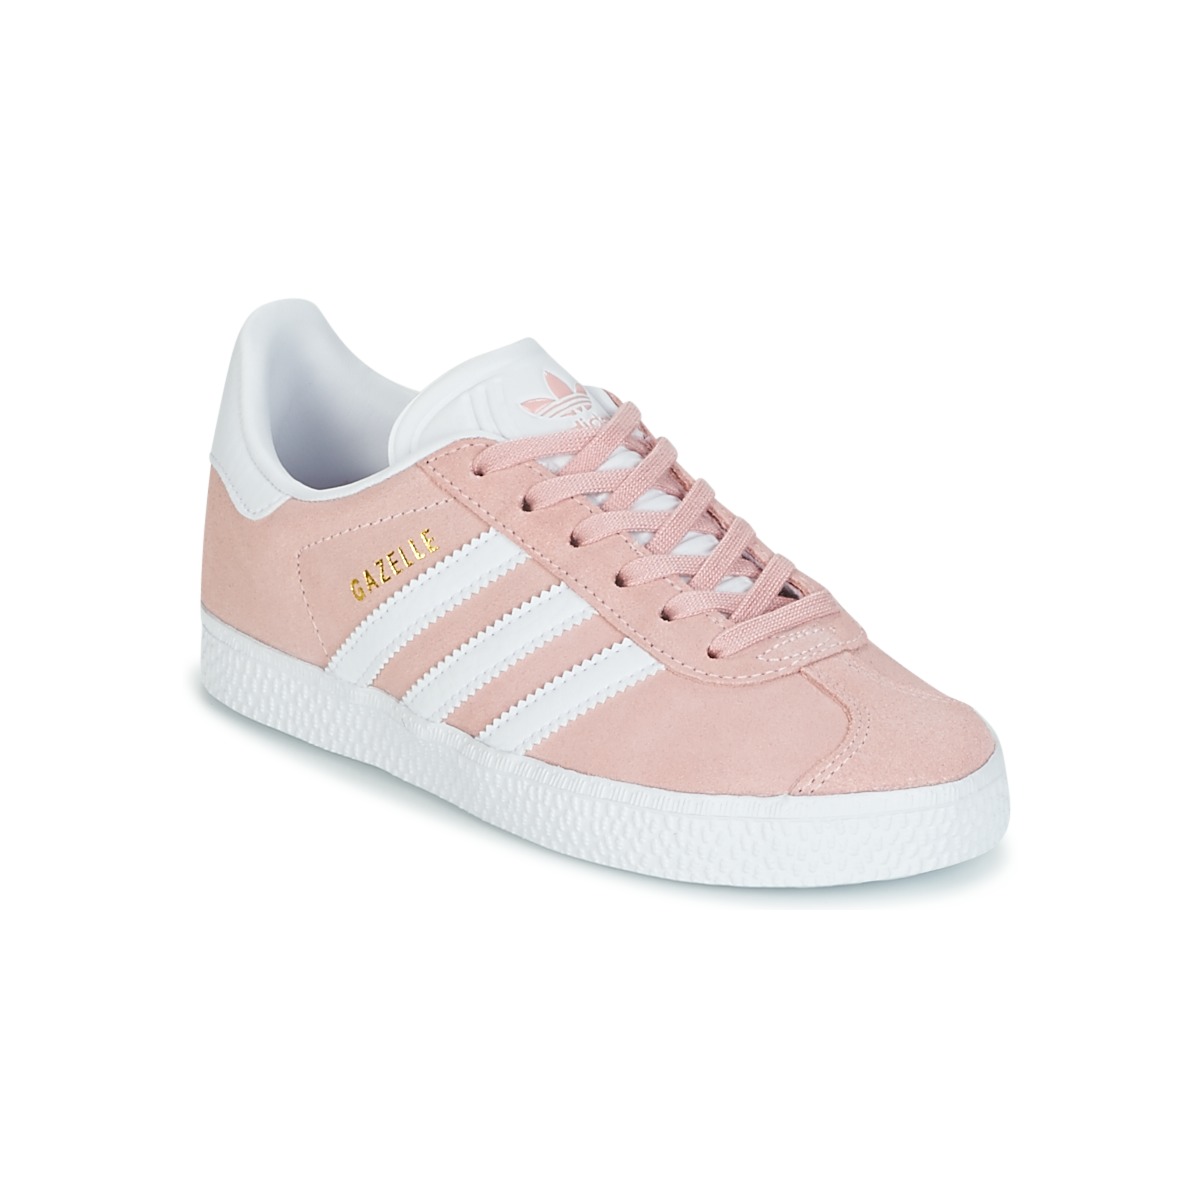 Chaussures Fille adidas champion collab shoes clearance code GAZELLE C Rose